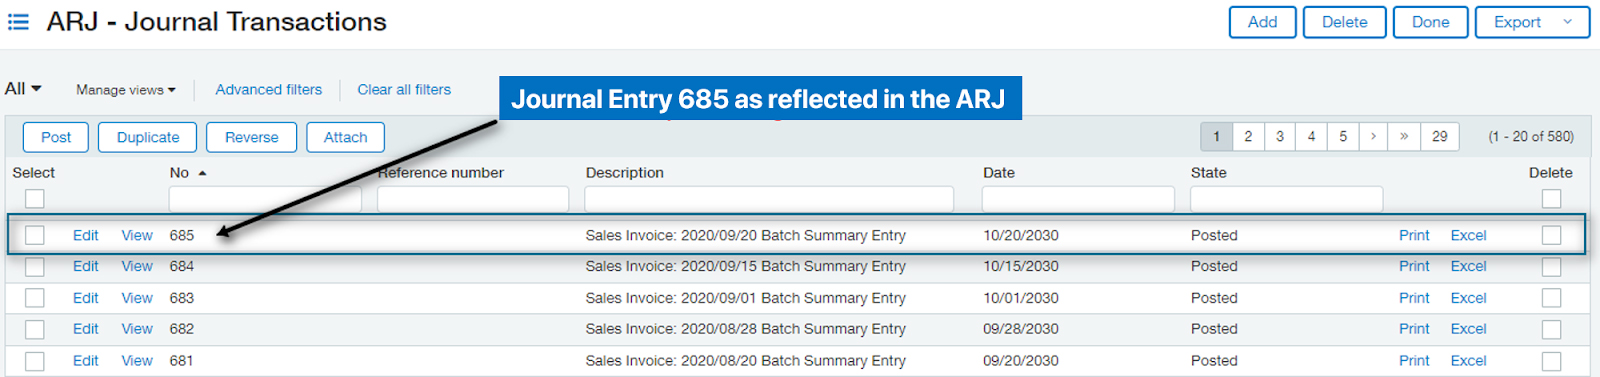 Image showing the entries in the accounts receivable journal.